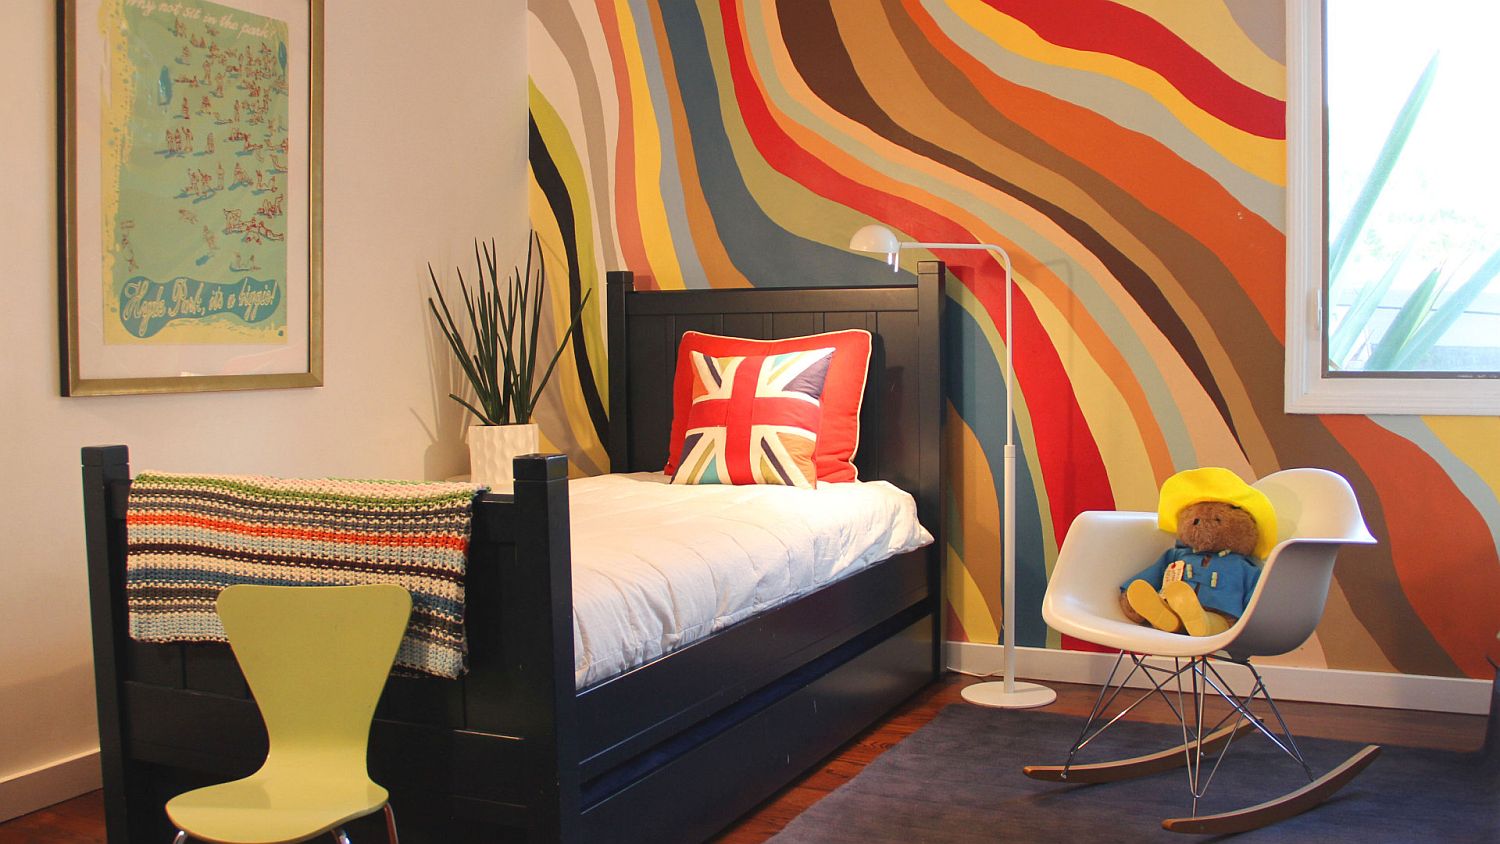 Creative Ways to Liven Up Walls with Paint